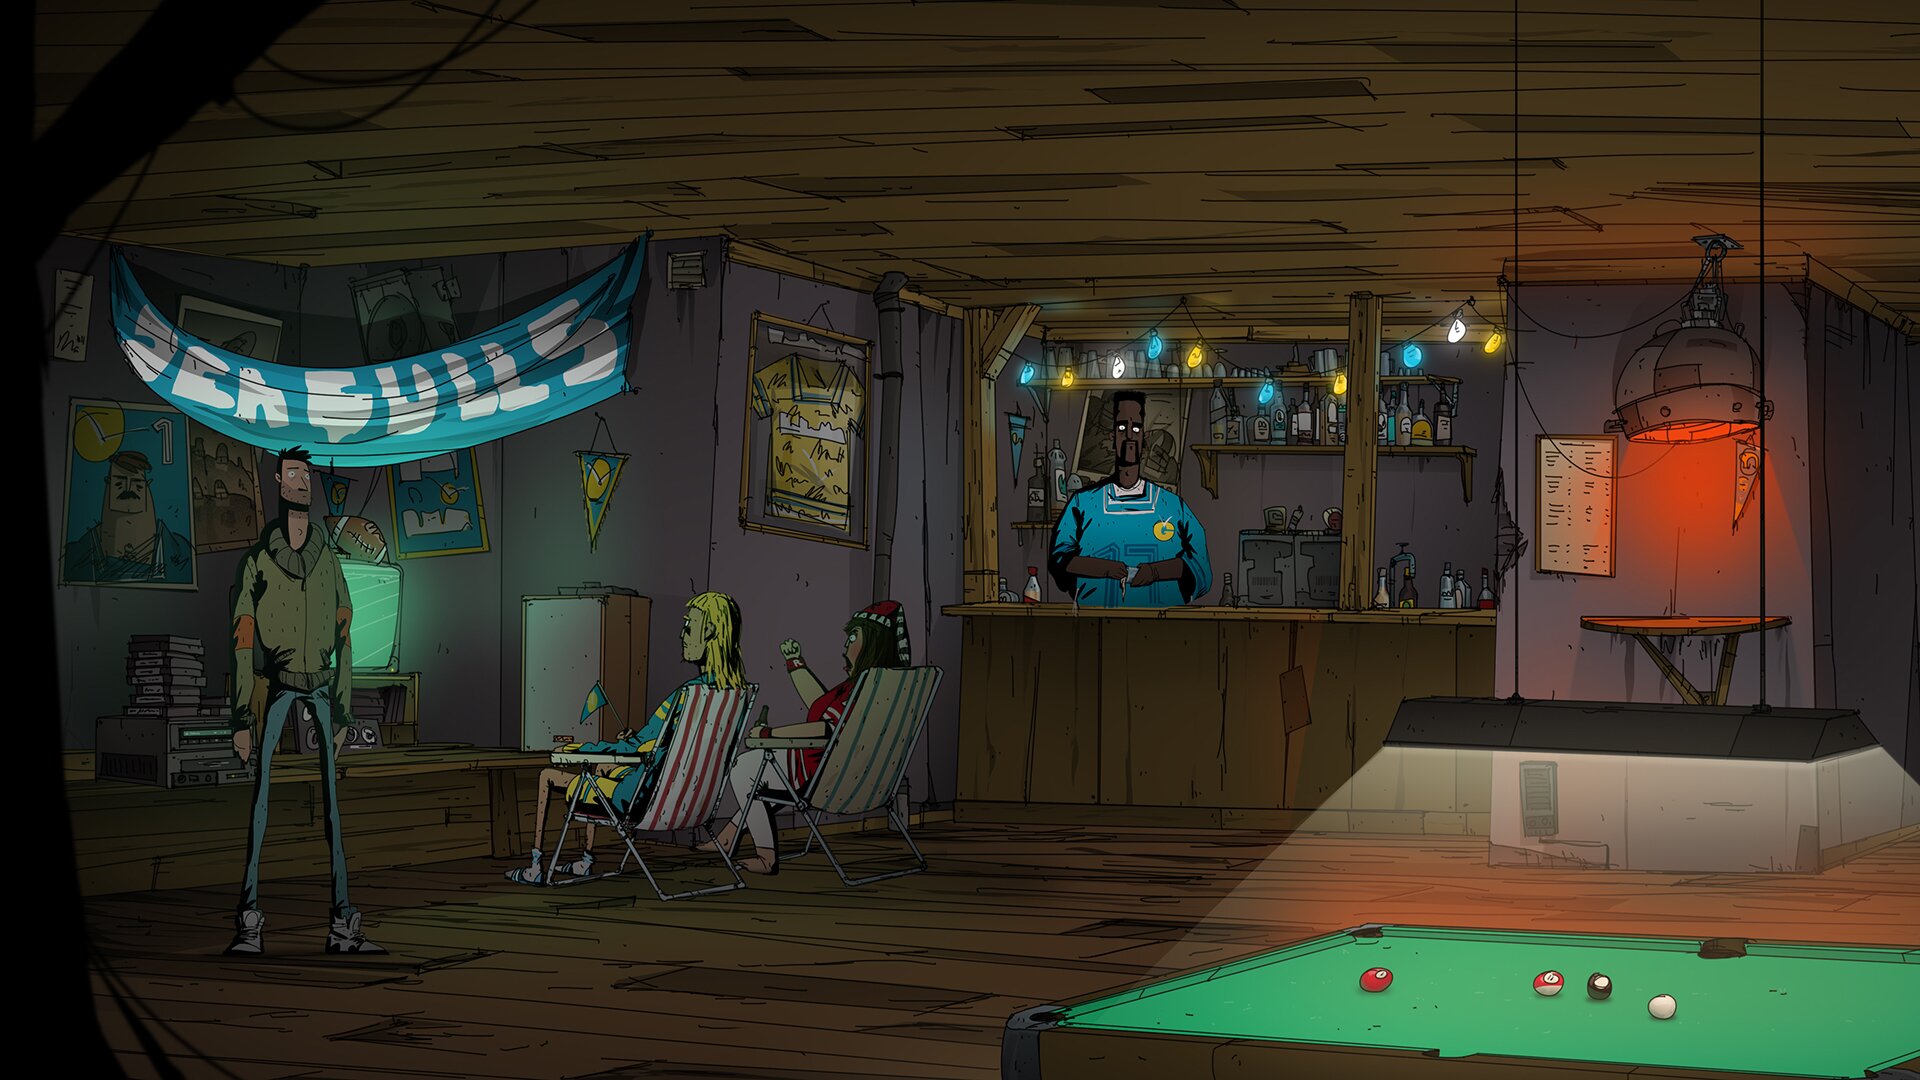 free for mac download Unforeseen Incidents